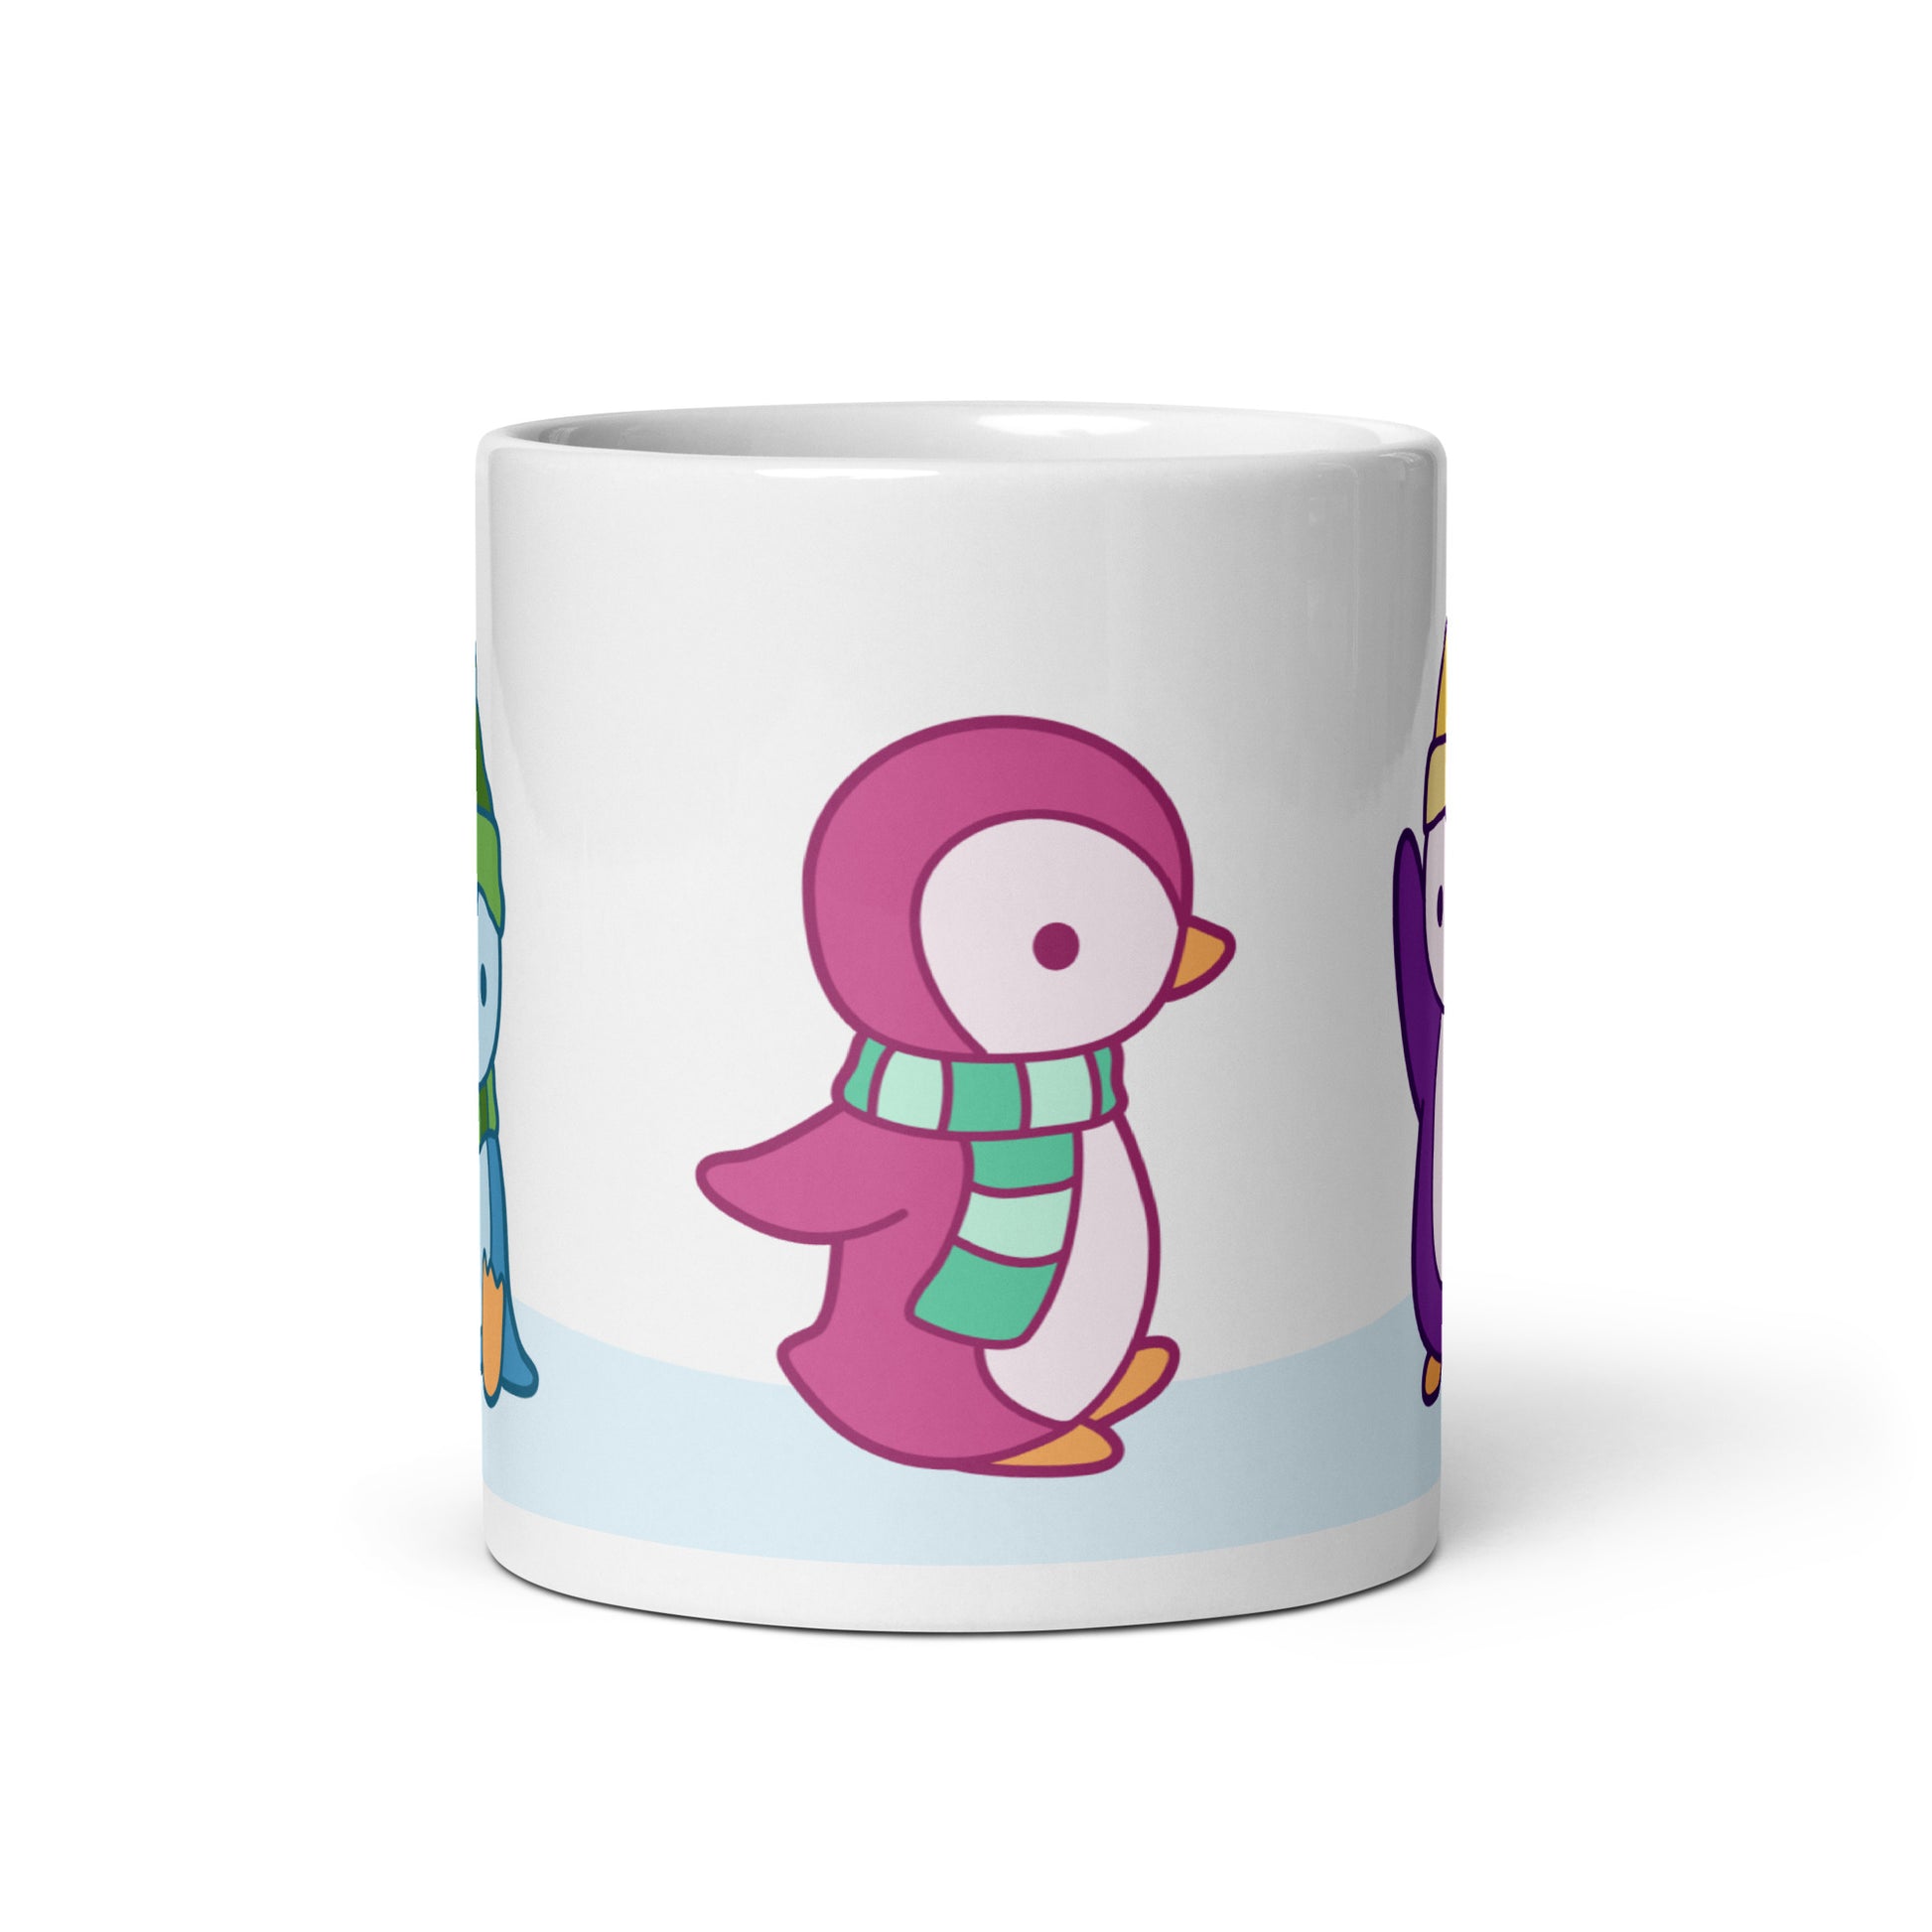 A white 11 ounce ceramic mug featuring an illustration of peguins in the snow. The primary visible penguin is pink, with a green striped scarf.